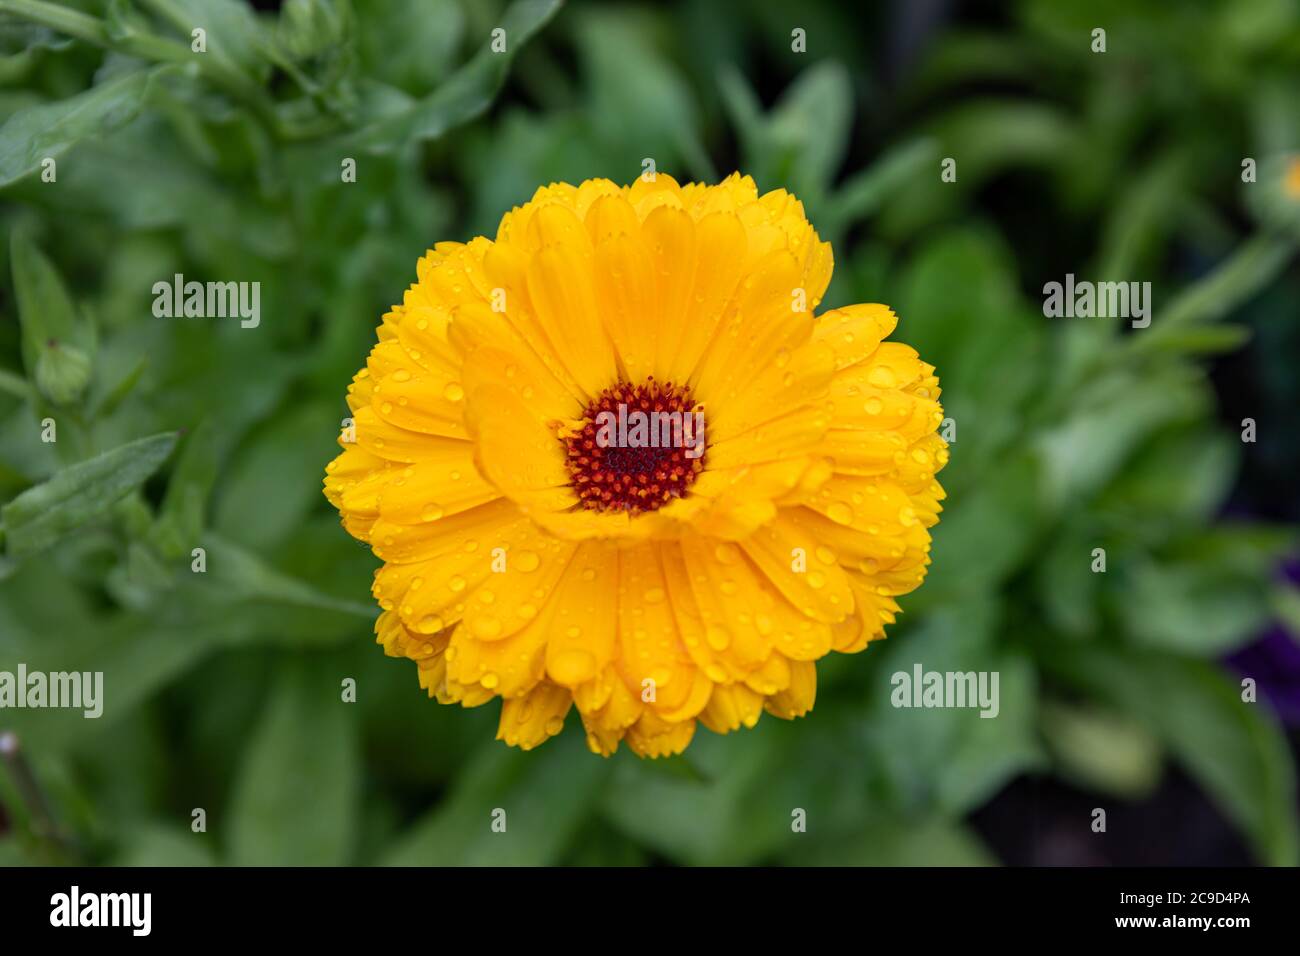 Rainy day closeup of a yellow Calendula officinalis flower, plant commonly known as pot marigold, ruddles, common marigold or Scotch marigold Stock Photo